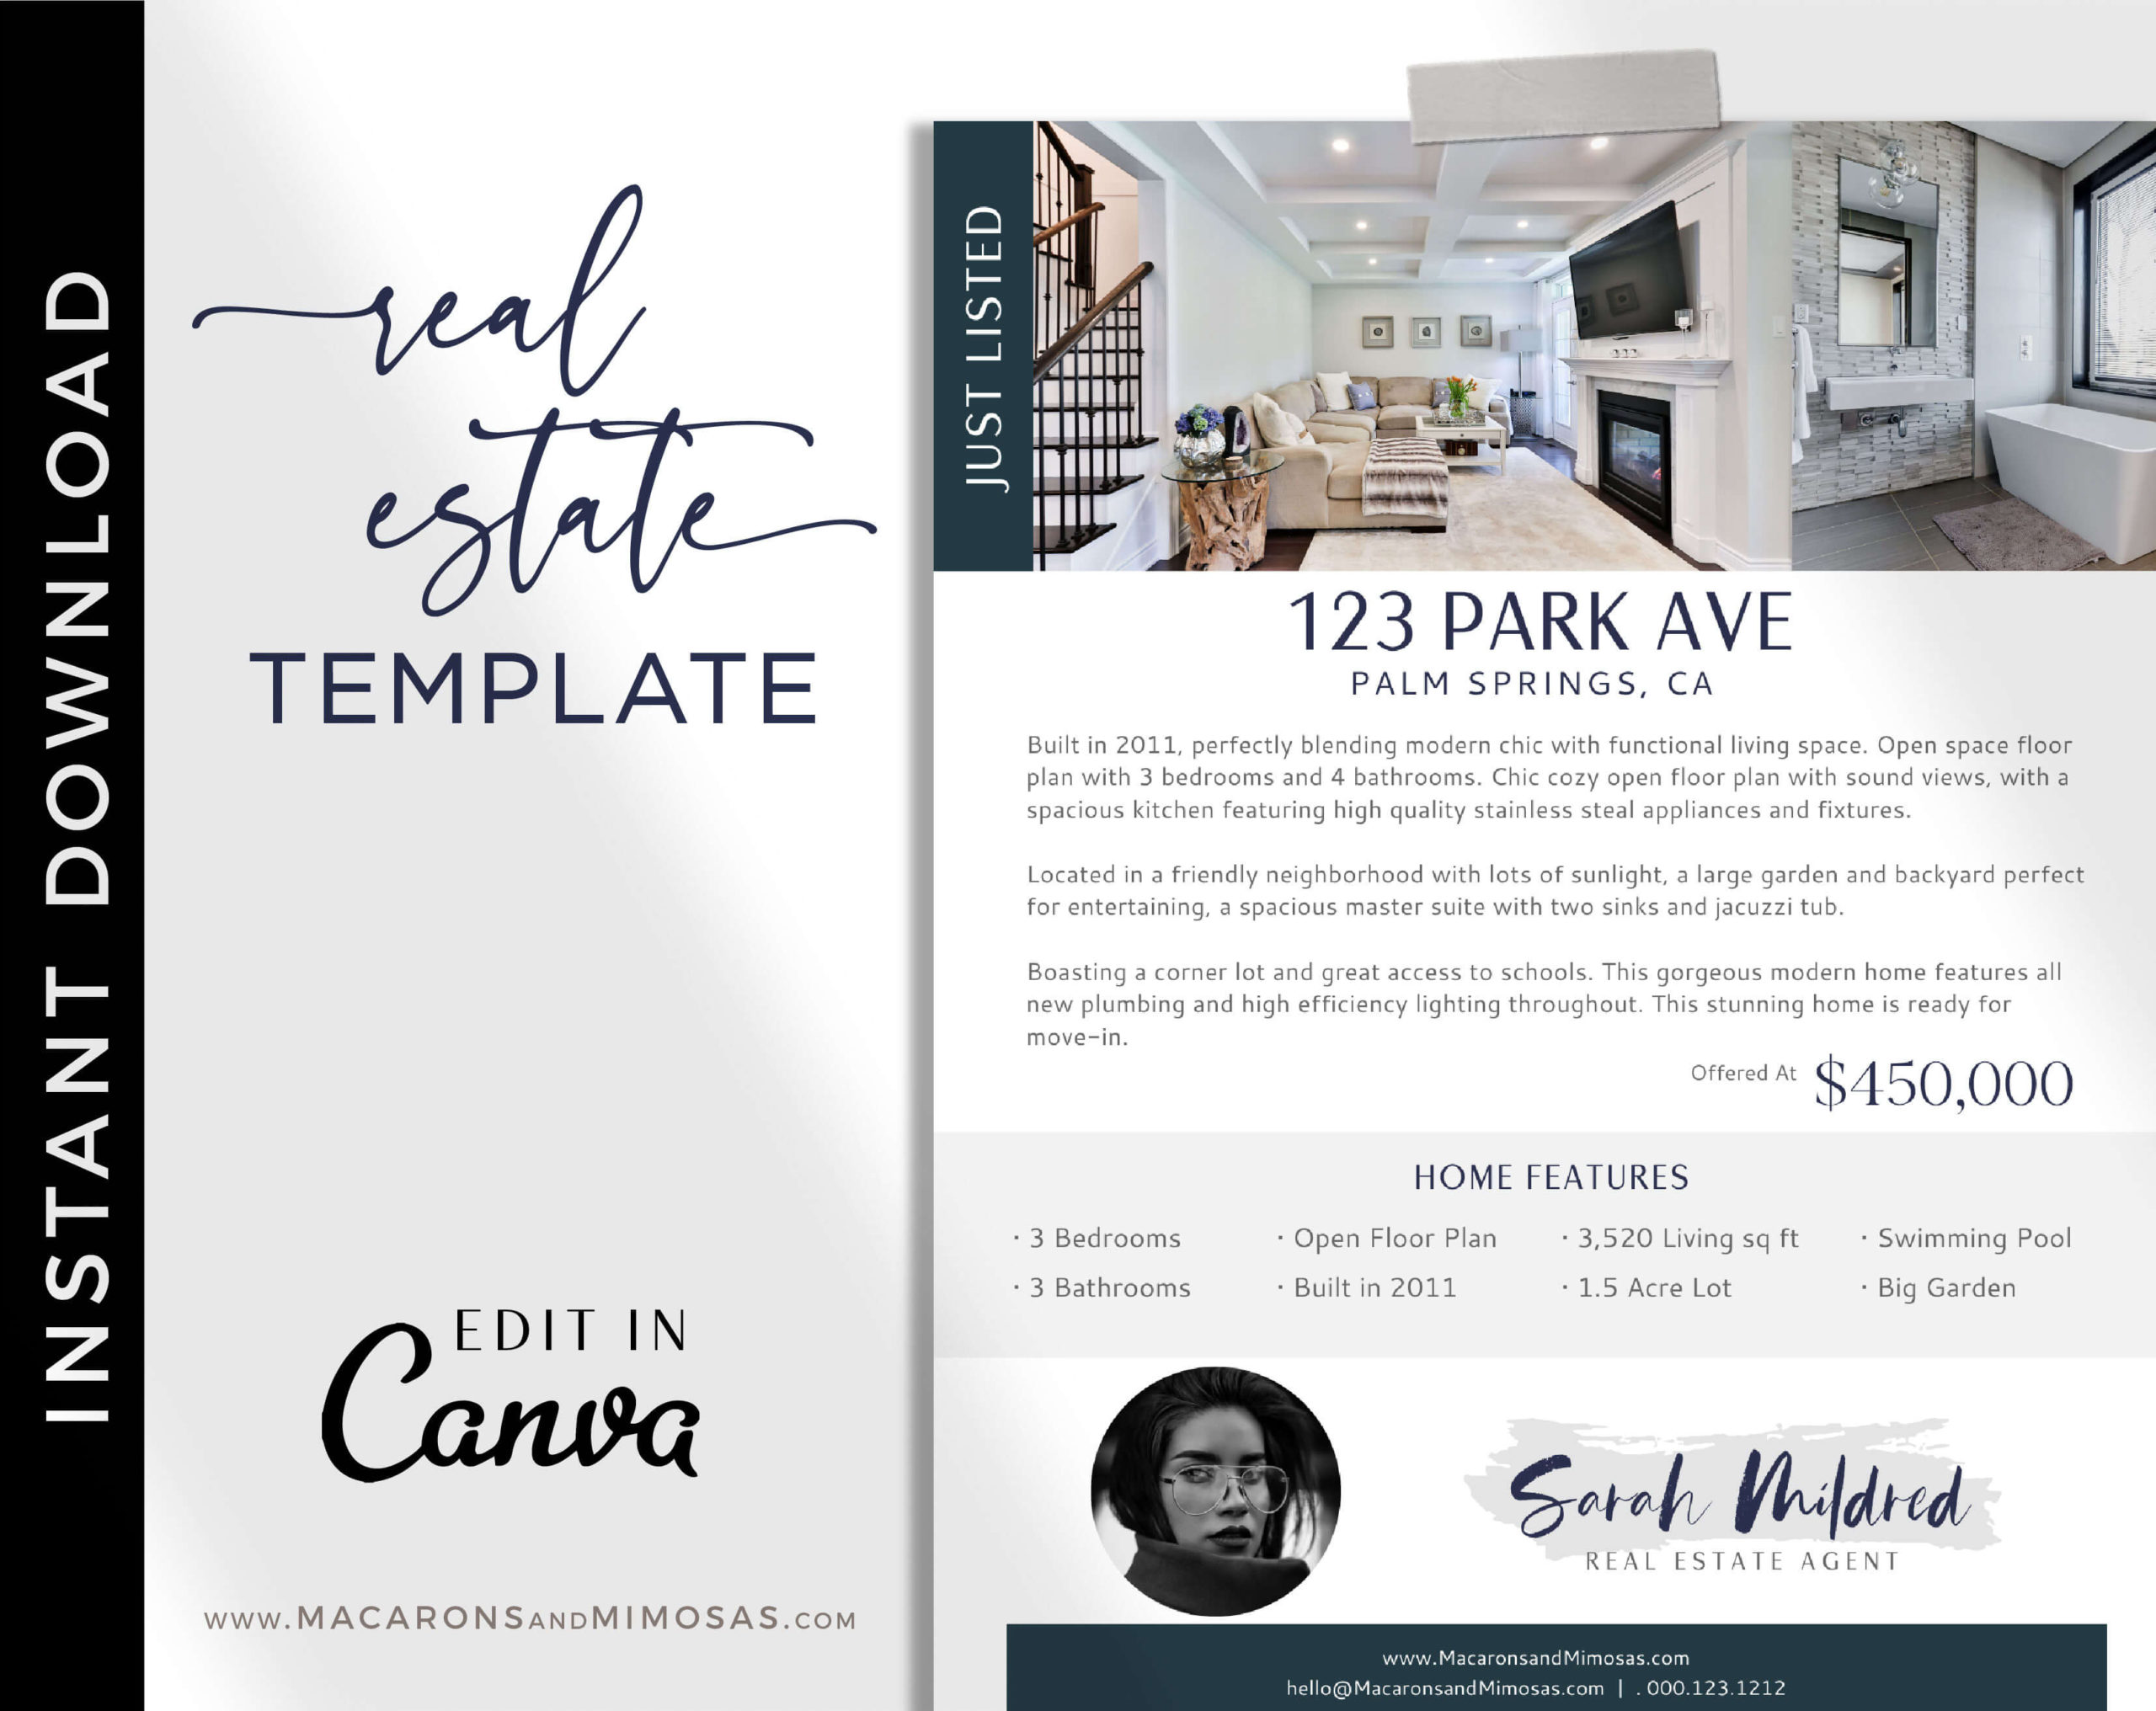 Open House Flyer Template, Real Estate Just Listed Home Flyer Sheet, Canva Marketing New House Listing, Realty House for Sale Template